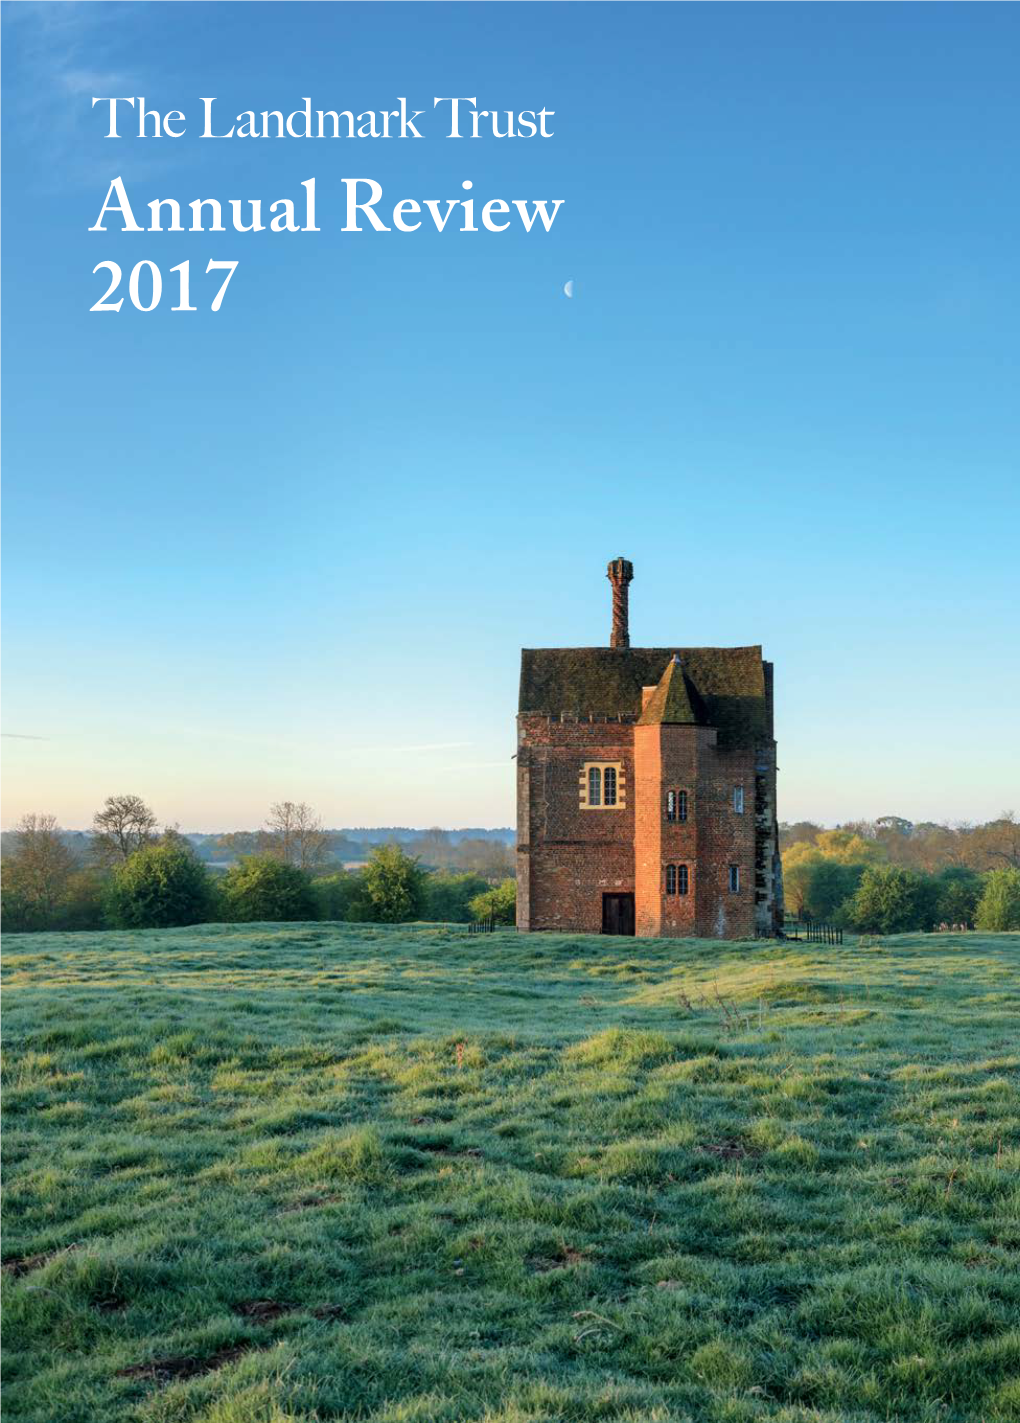 View Our Annual Review 2017